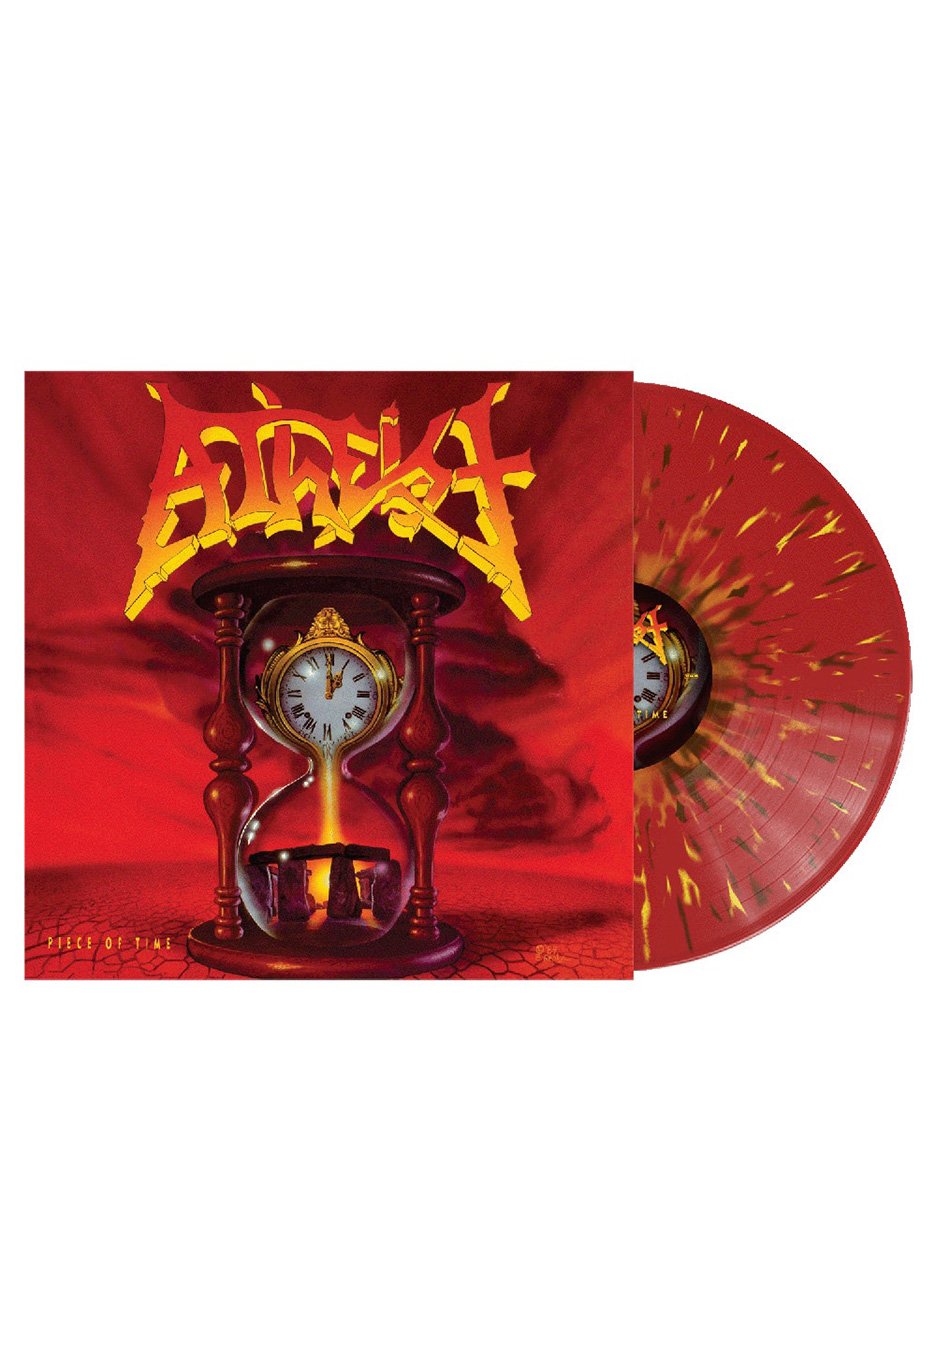 Atheist - Piece Of Time Red/Brown/Yellow - Splattered Vinyl